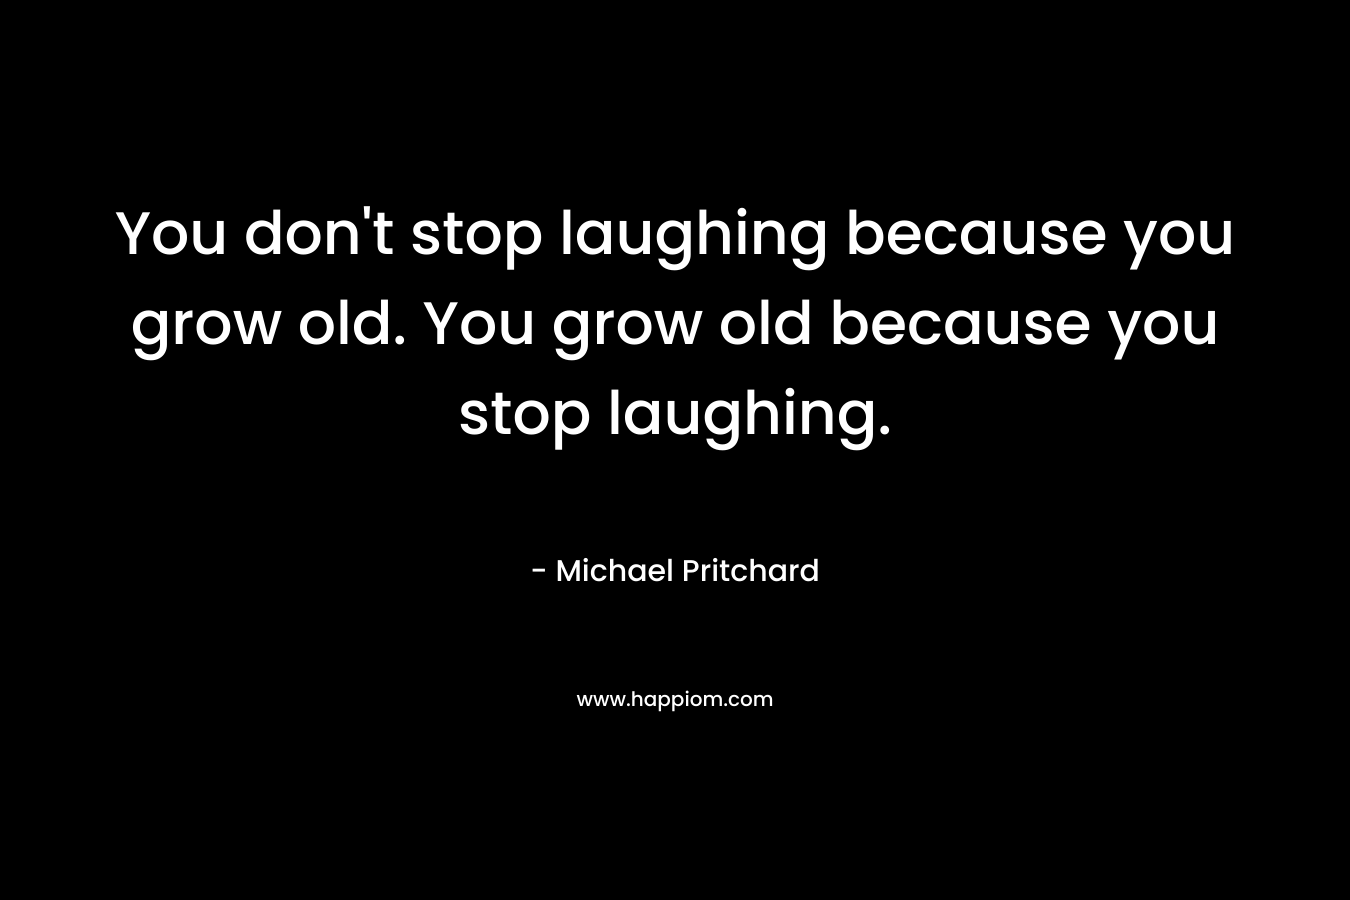 You don’t stop laughing because you grow old. You grow old because you stop laughing. – Michael Pritchard